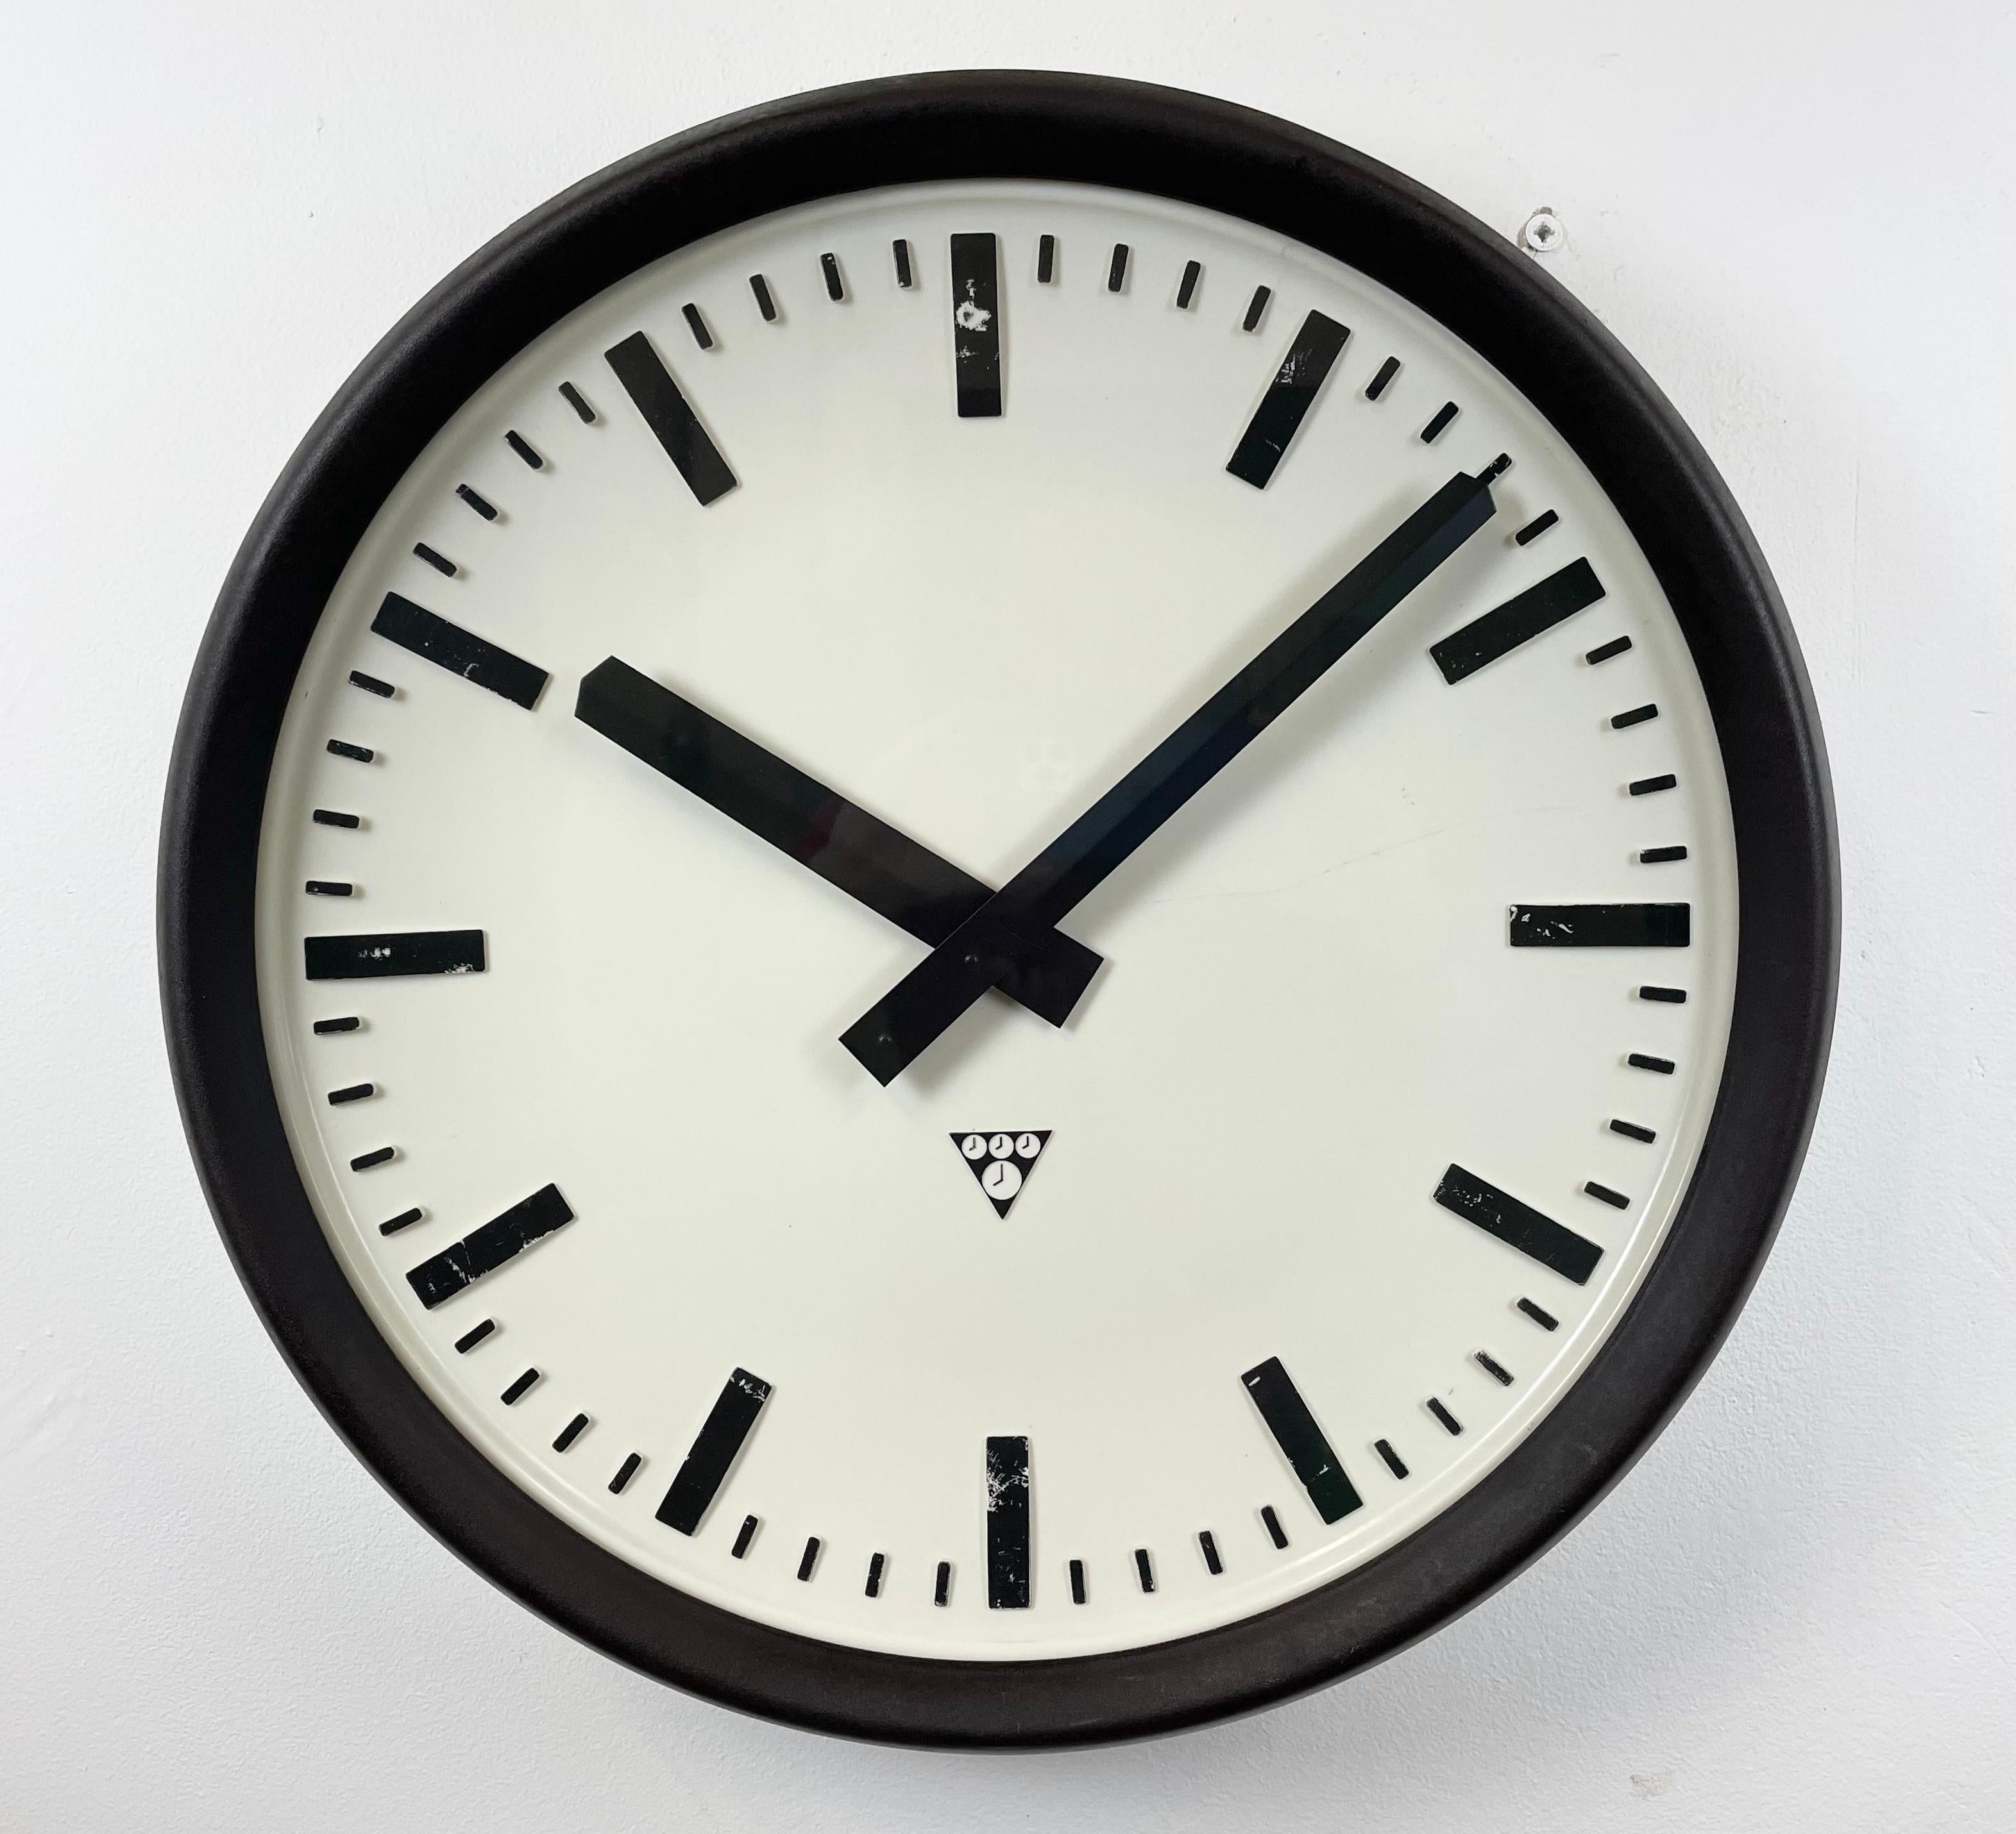 This large wall clock was produced by Pragotron in former Czechoslovakia during the 1960s. It features a brown bakelite frame, a white bakelite dial, an aluminium hands and a clear glass cover. The piece has been converted into a battery-powered